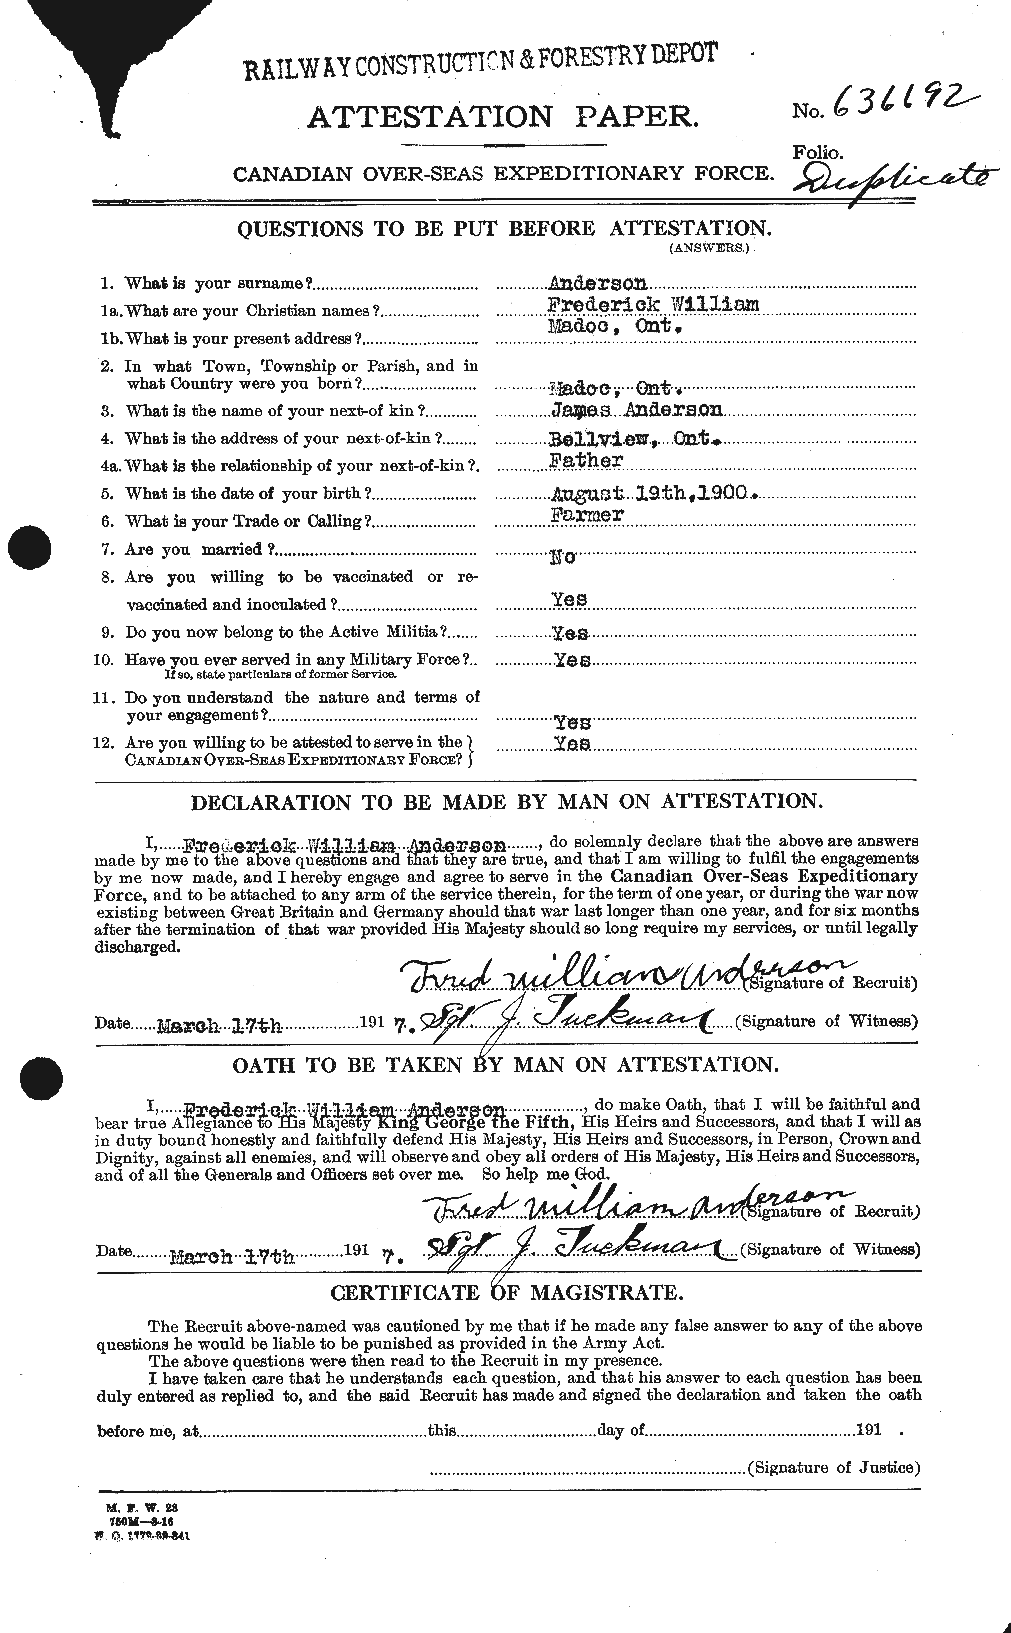 Personnel Records of the First World War - CEF 209802a